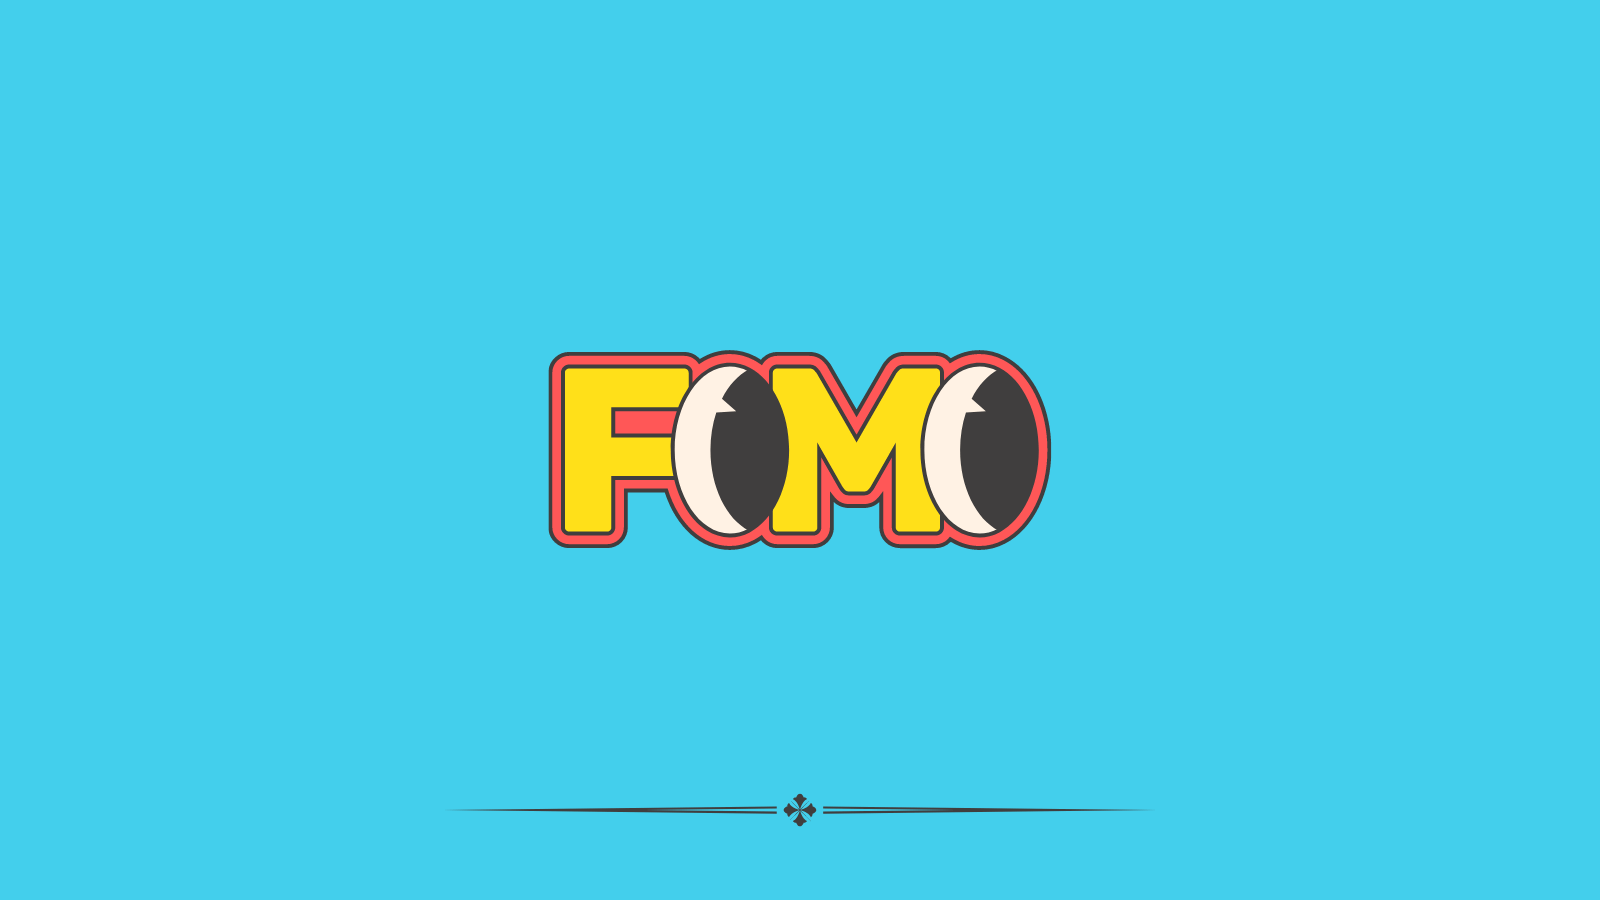 FOMO commonly shows up in scenarios